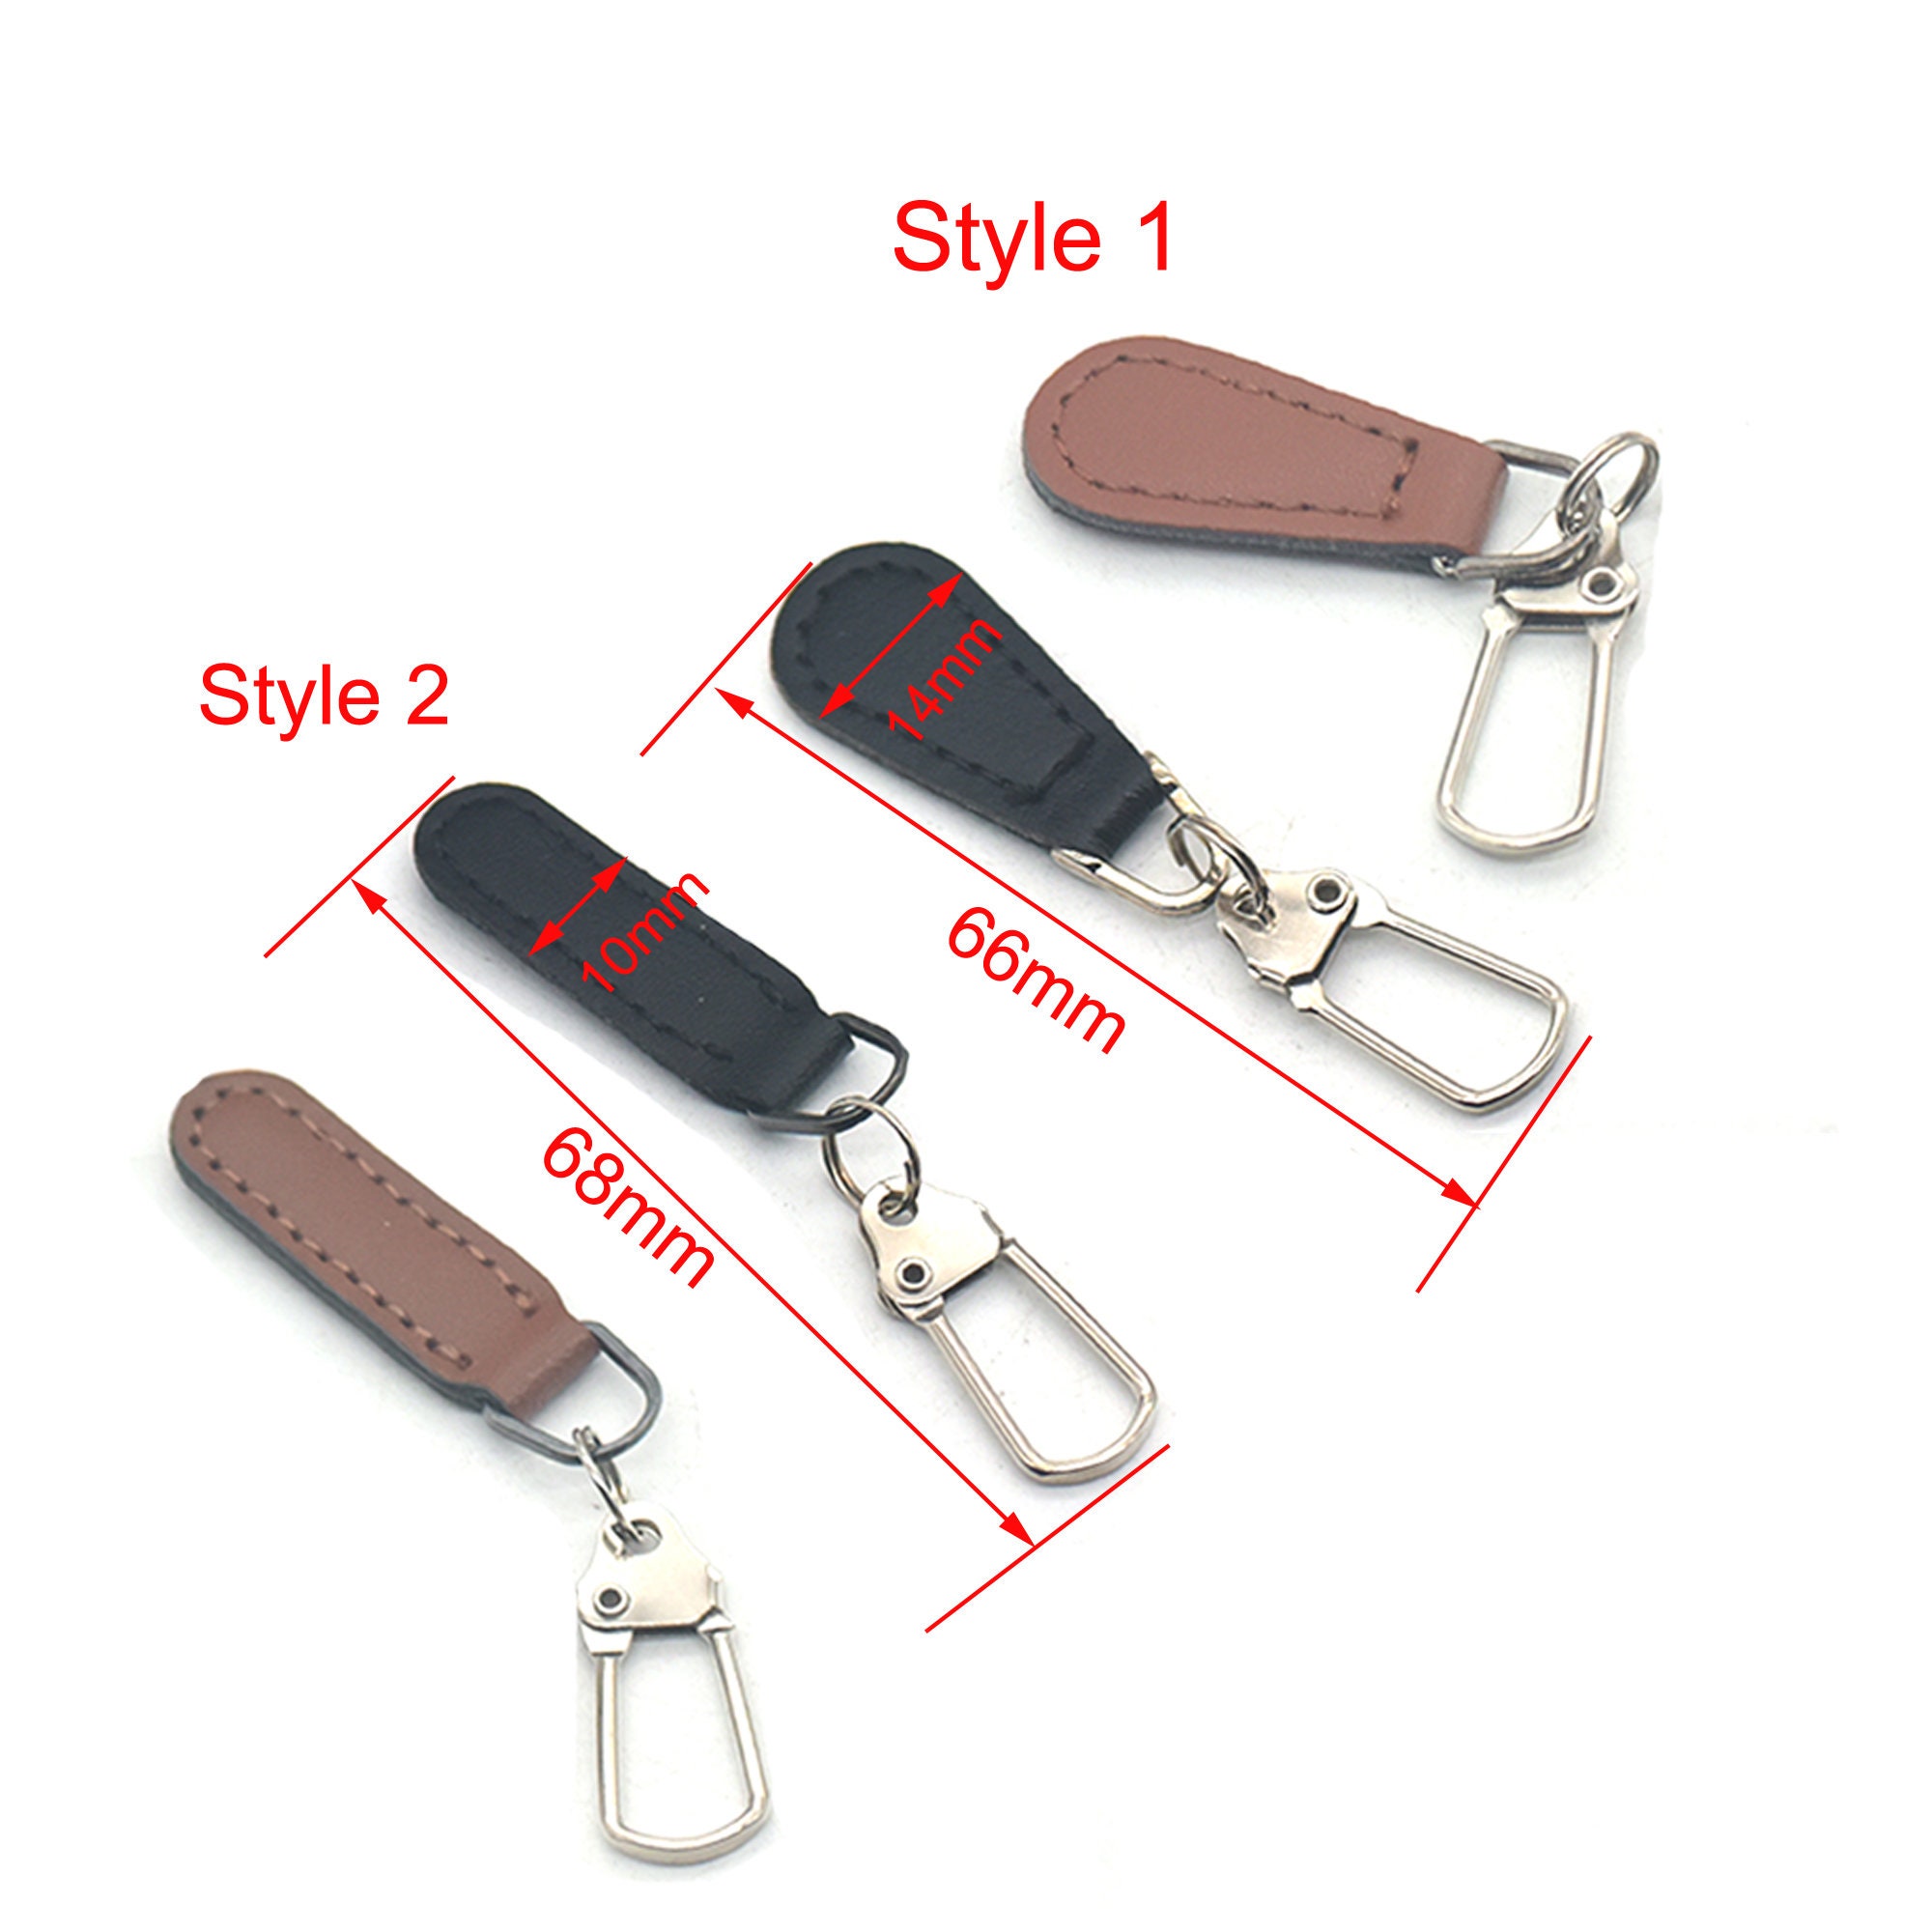 1000 PU Leather Zipper Pull Fixer Replacement for Tab Purse Bag Repair,  Available in Several Styles, With Stitching, Rivets or Plain 